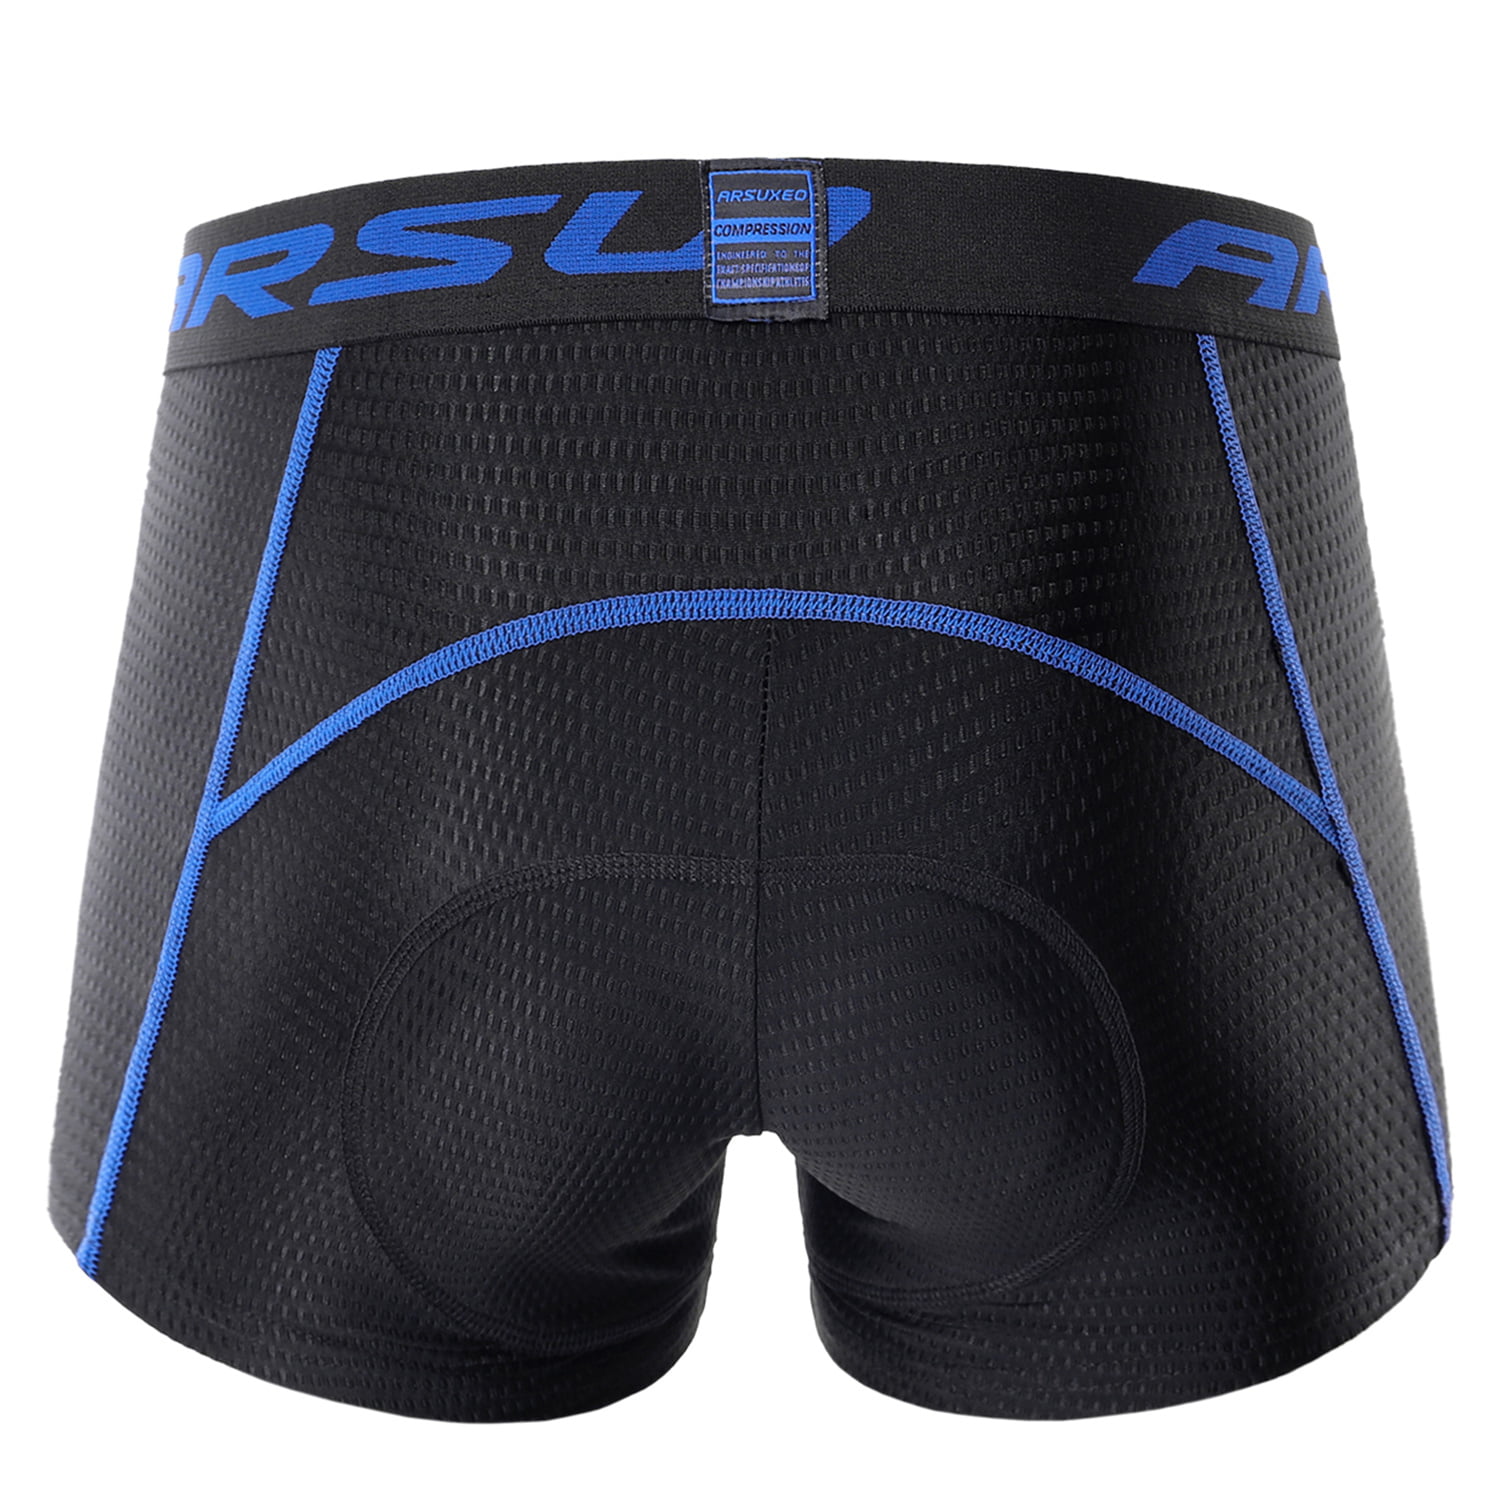 Kstyhome Men Cycling Underwear Shorts Lightweight Breathable 5D Padded MTB Bike Bicycle Shorts 